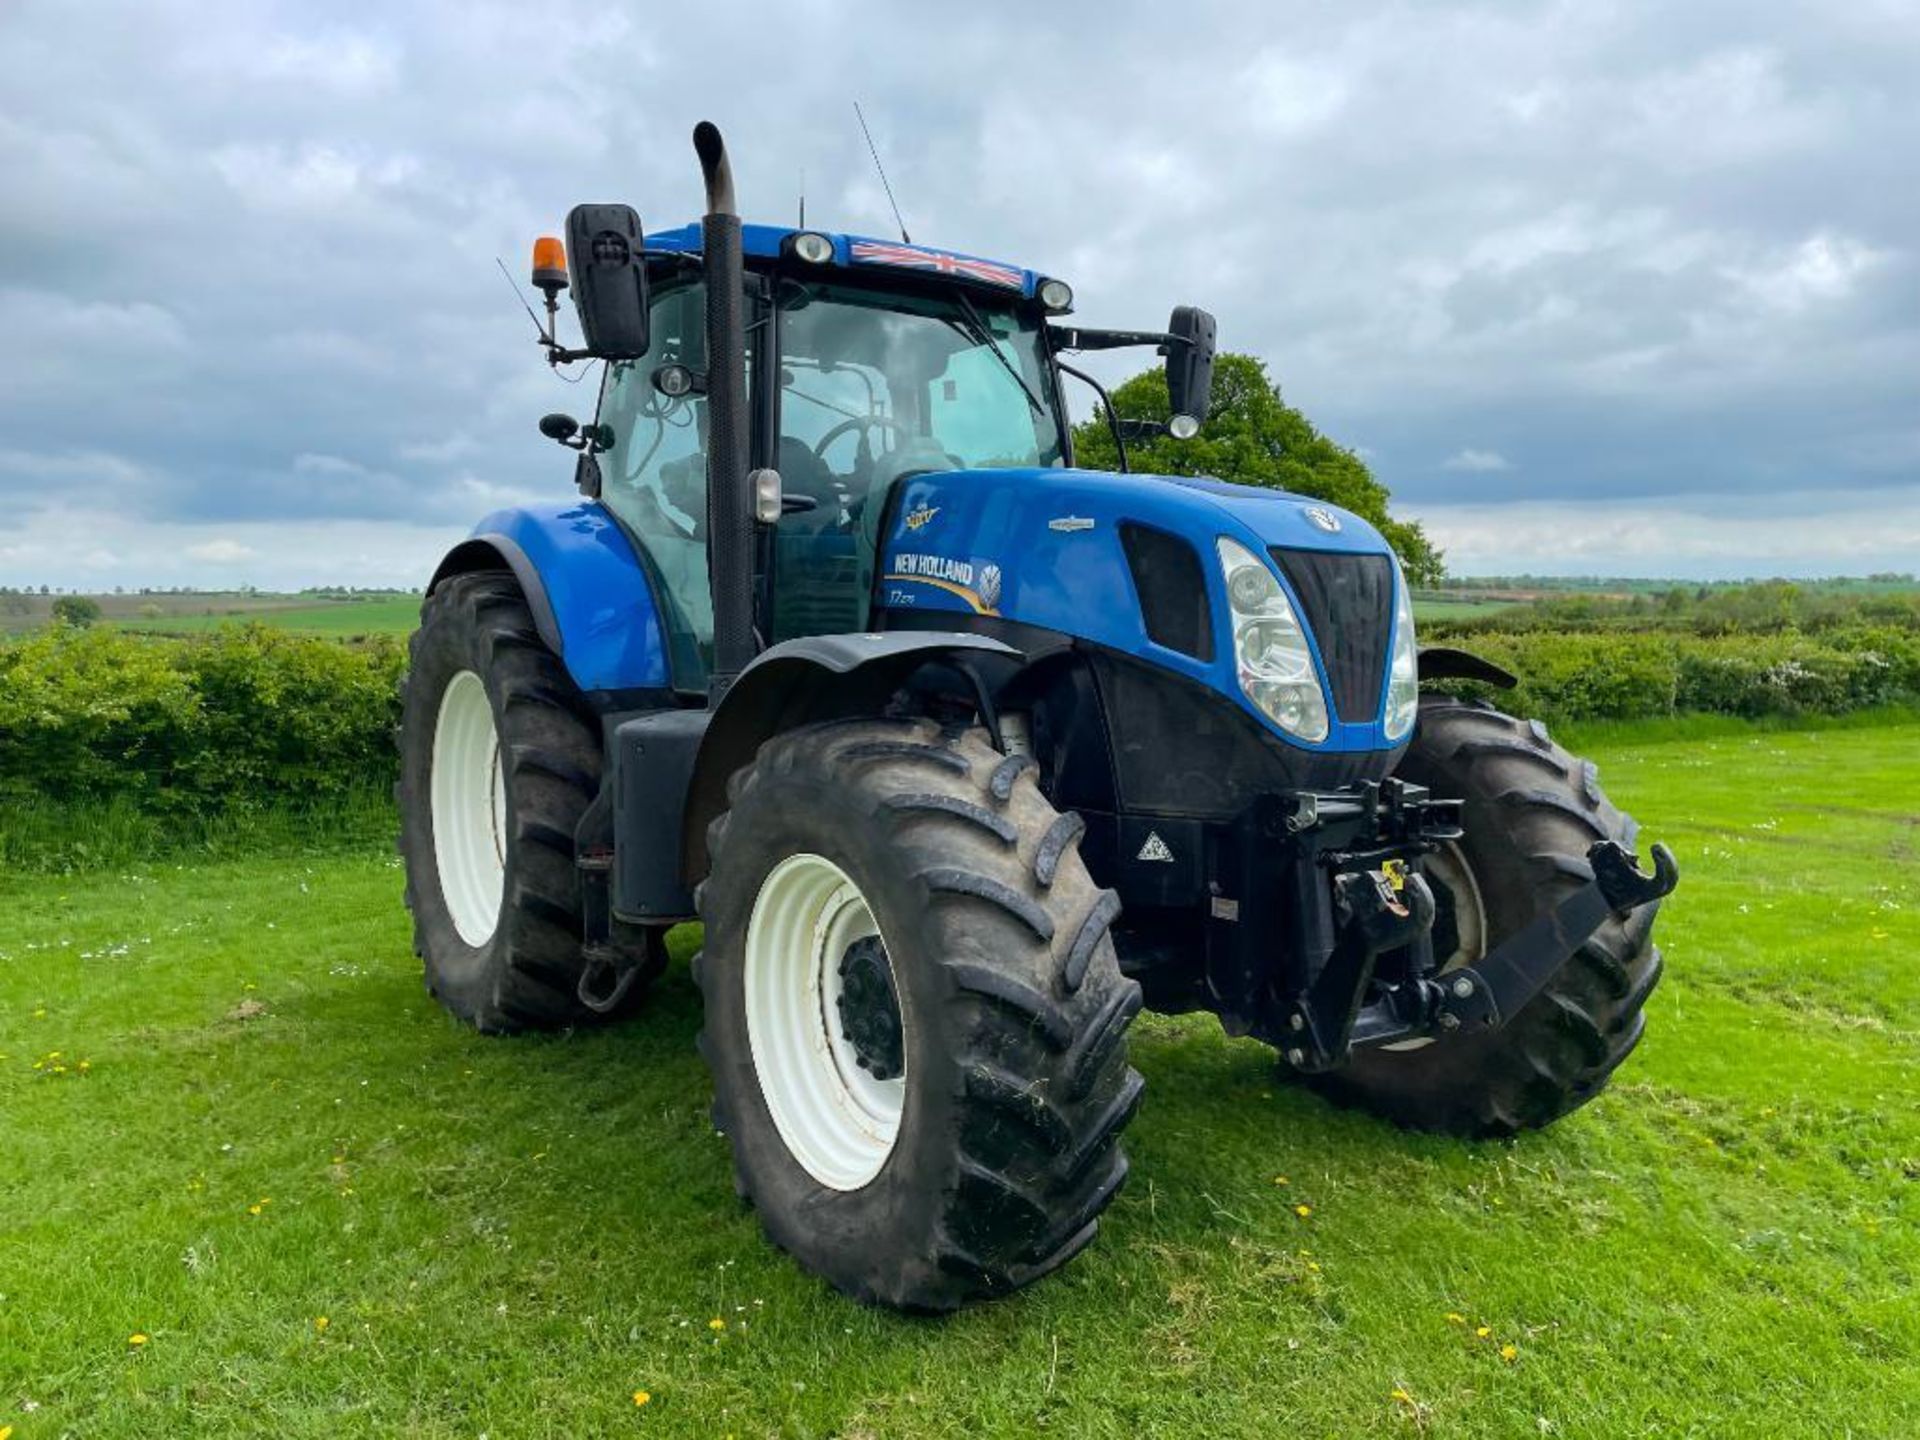 2015 New Holland T7.270 Auto Command 50Kph 4wd tractor with 4 electric spools, air brakes, cab and f - Image 17 of 17